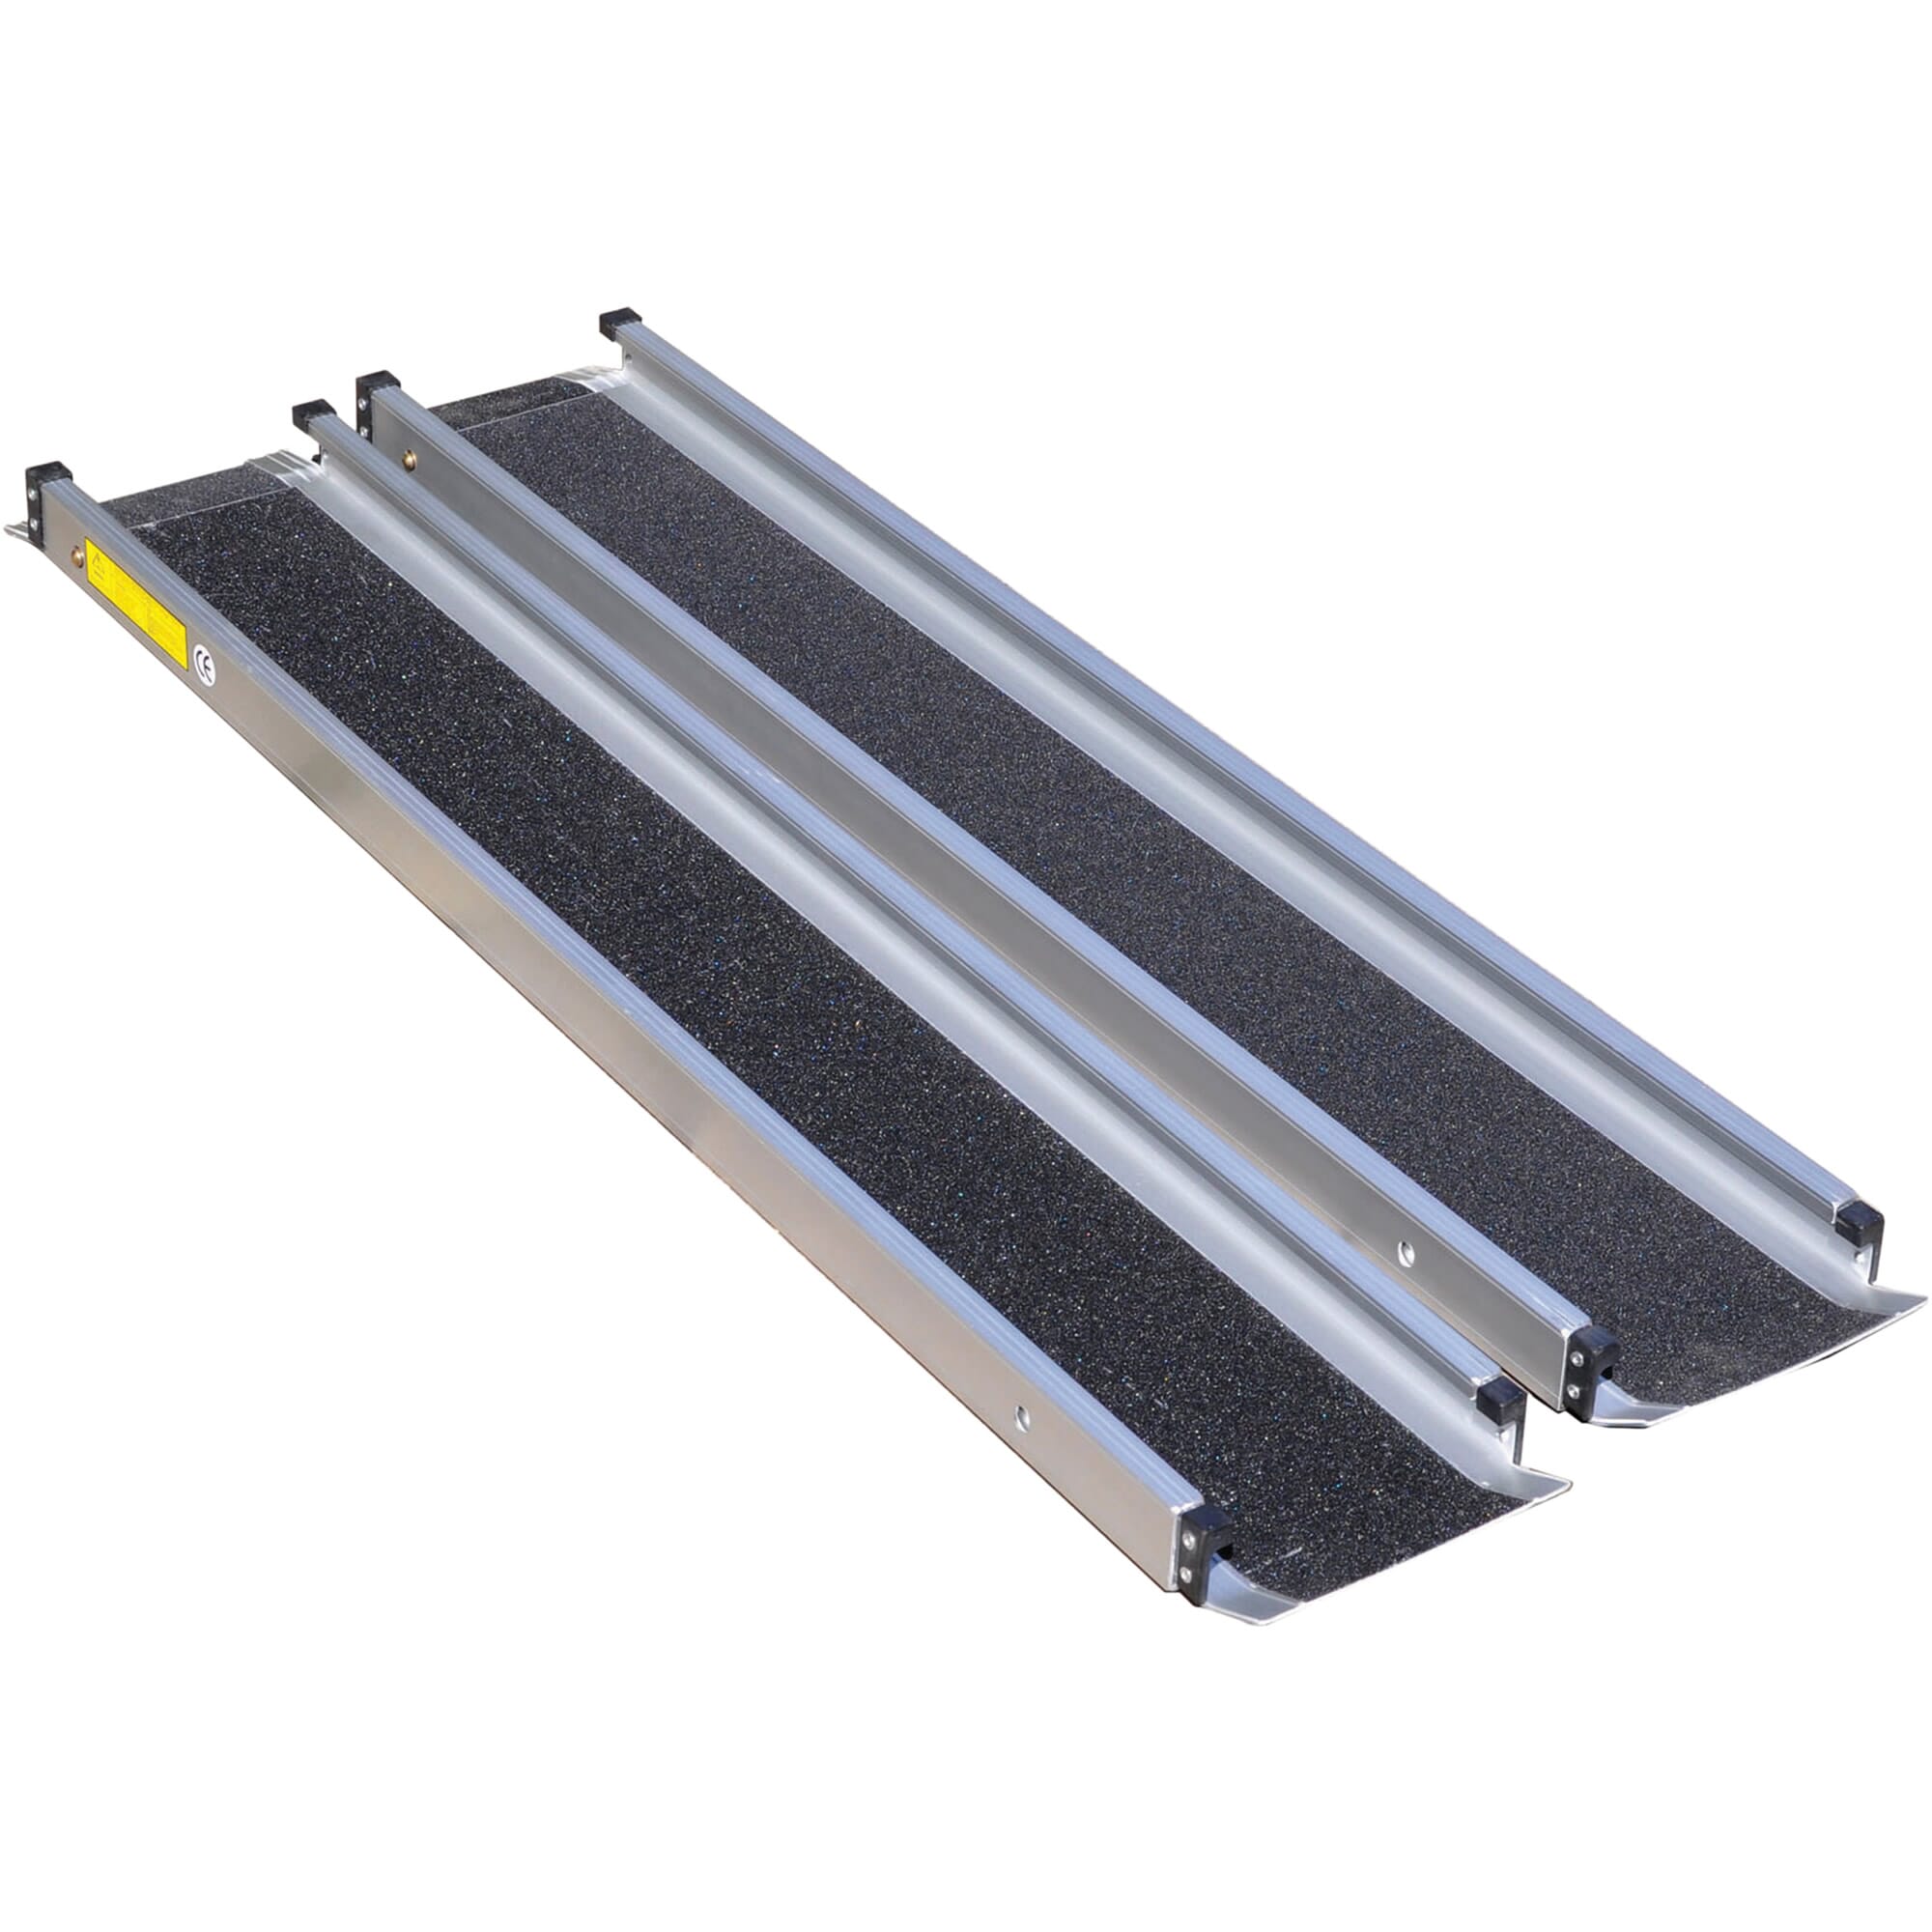 View Telescopic NonSlip Channel Ramps 7ft information